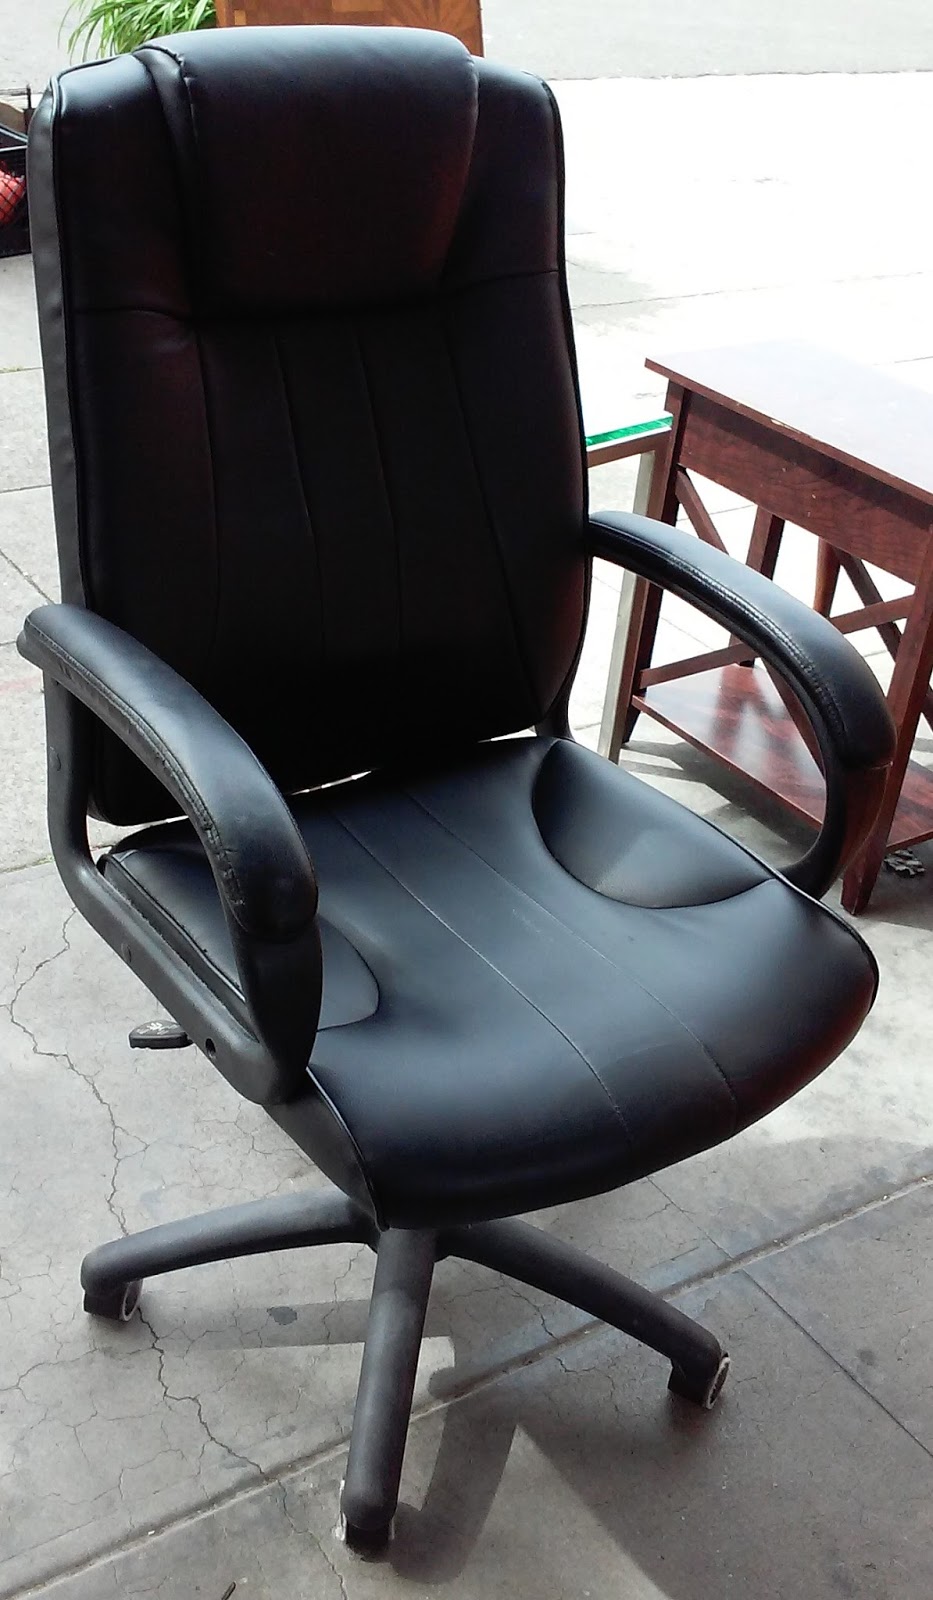 UHURU FURNITURE & COLLECTIBLES: SOLD Office Depot Executive Task Chair